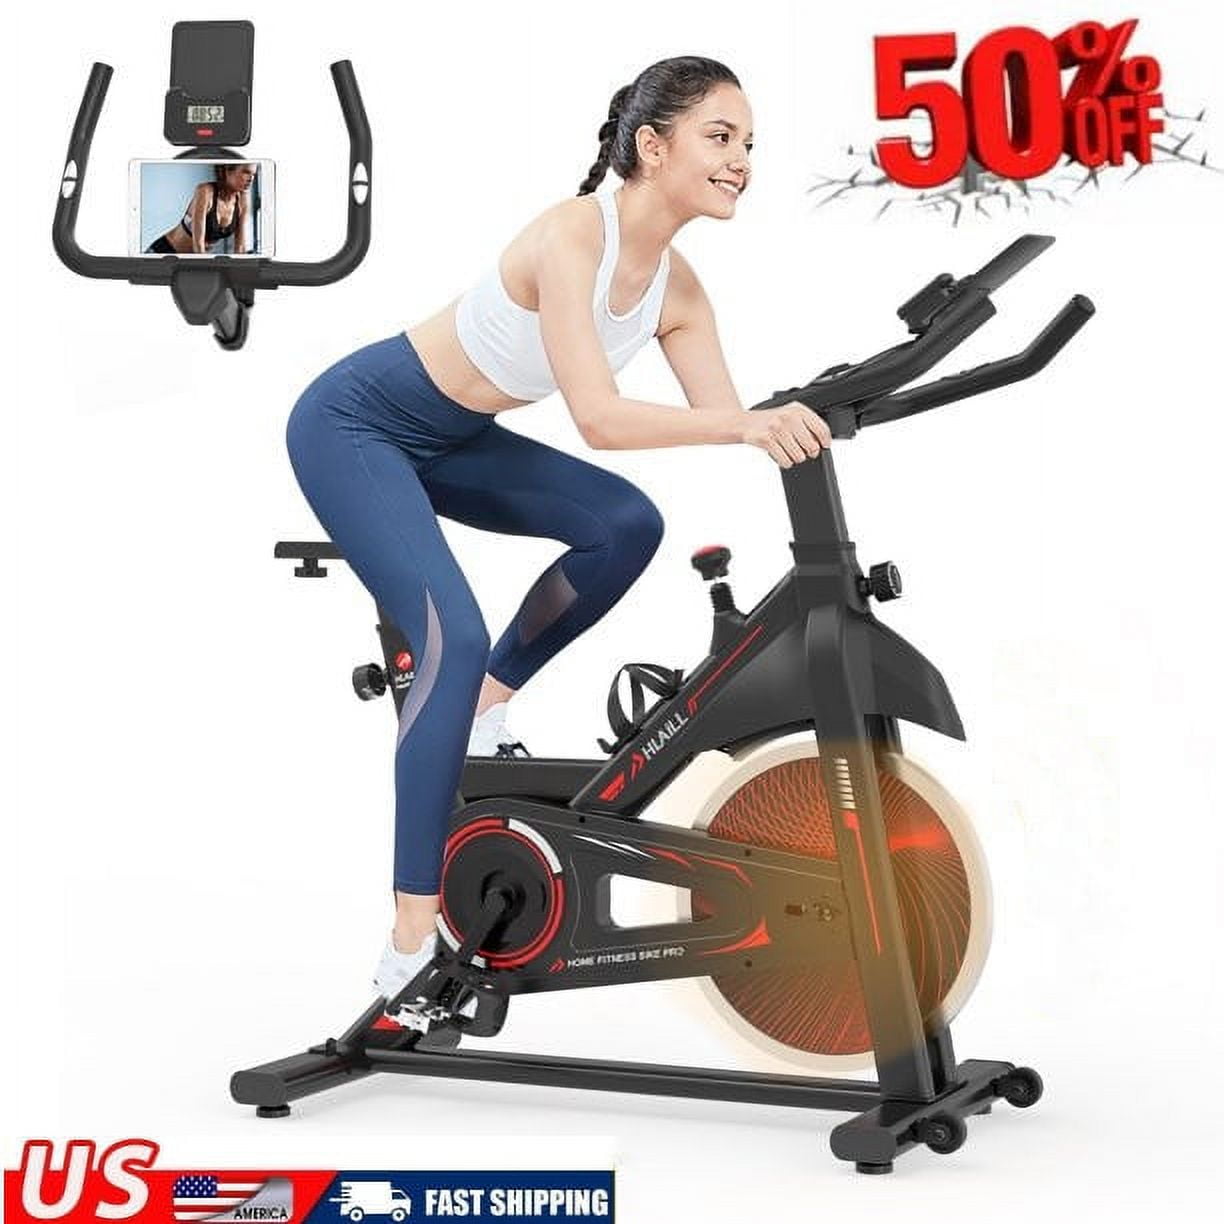 Home Indoor Cycling Bike Stationary - Exercise Bike with Comfortable Seat Cushion, Phone/Ipad Bracket, Heavy Flywheel and LCD Monitor for Home Gym